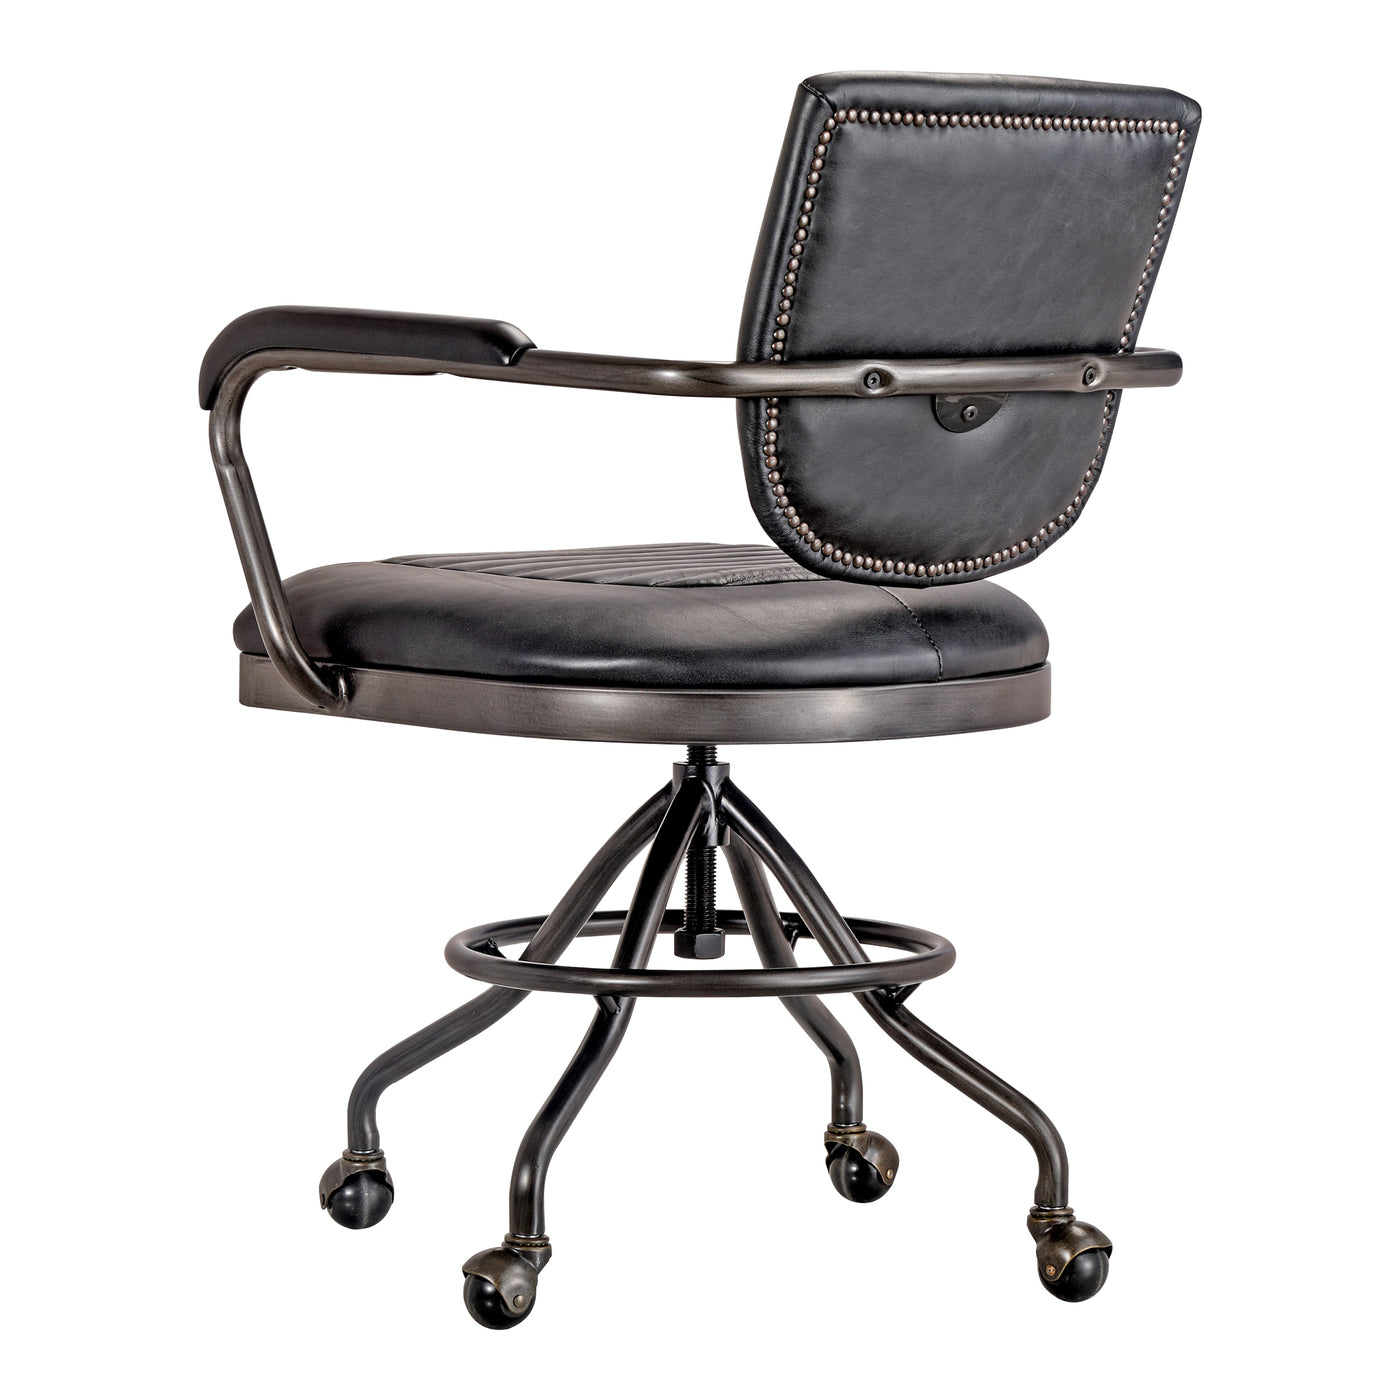 The Foster desk chair is the ultimate combination of comfort and style for your recording studio, home office, study nook ...